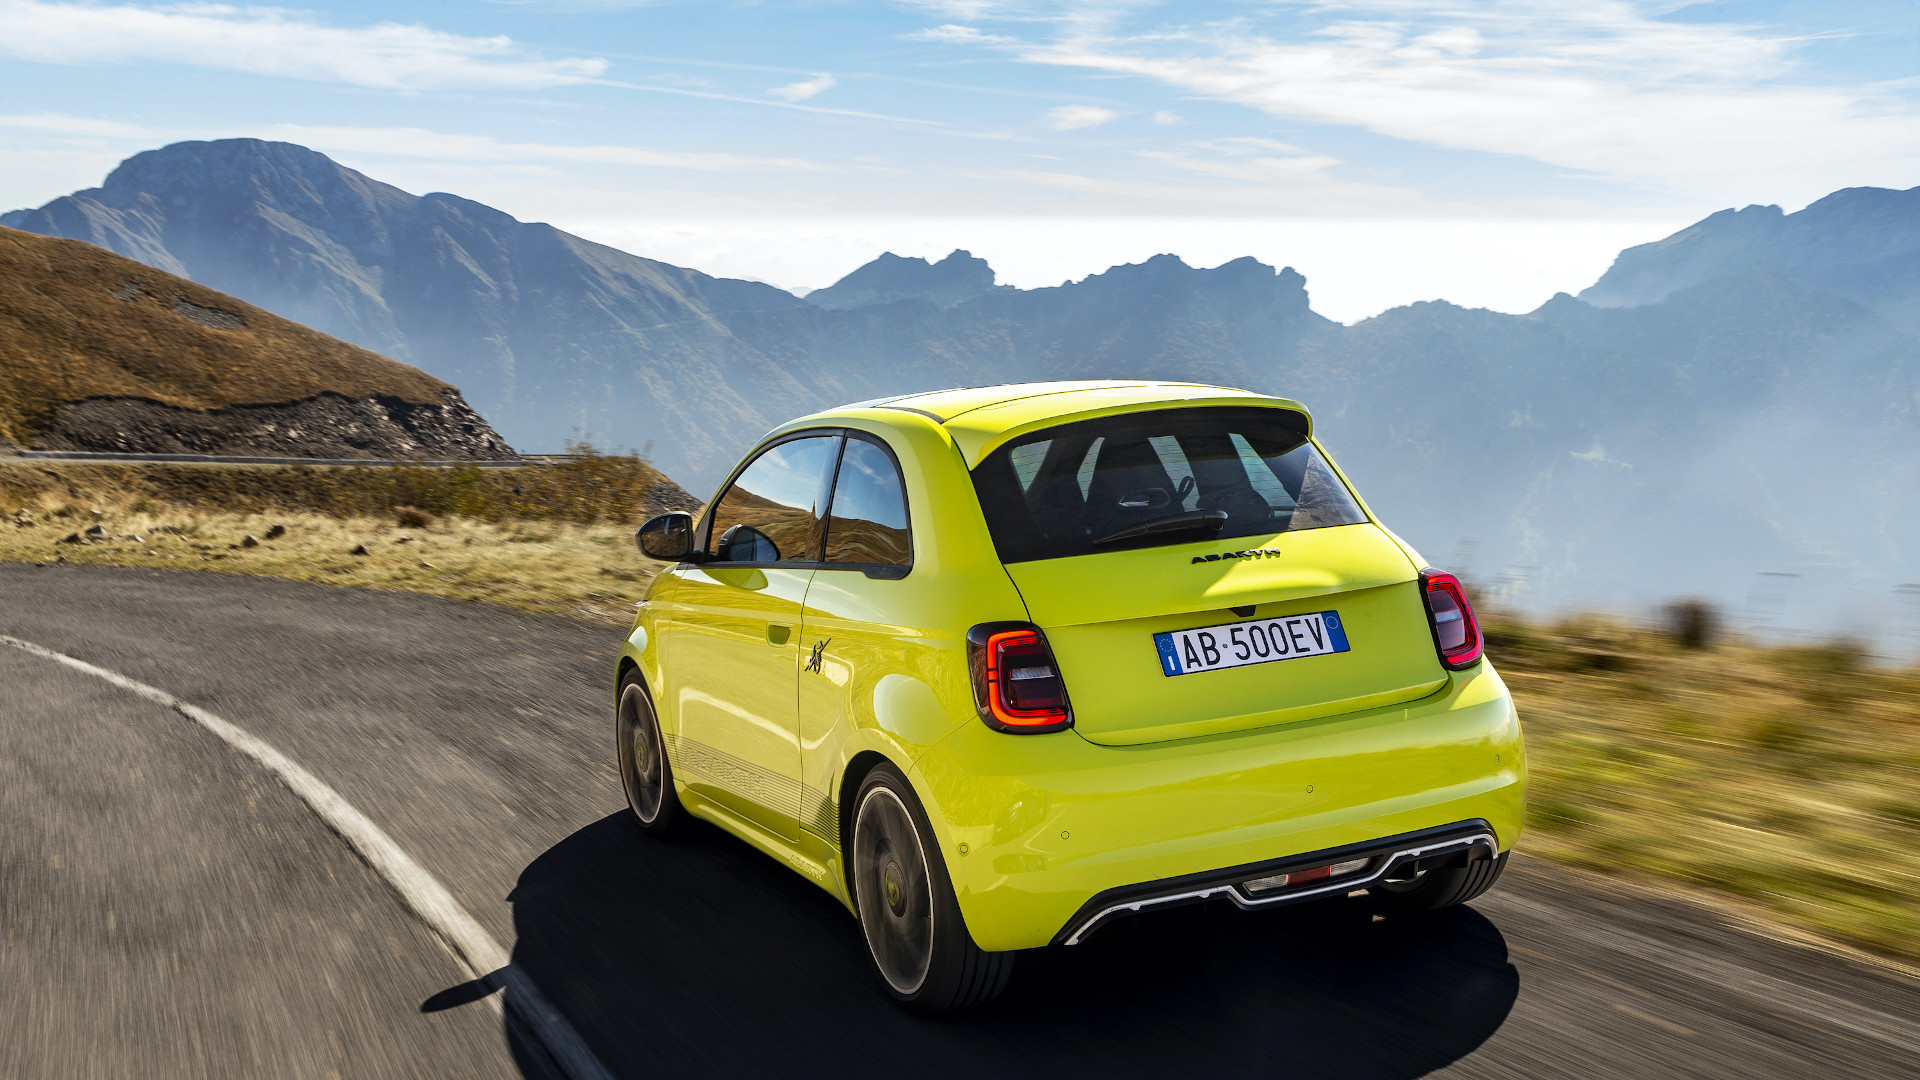 The New Abarth 500e proves popular across Europe